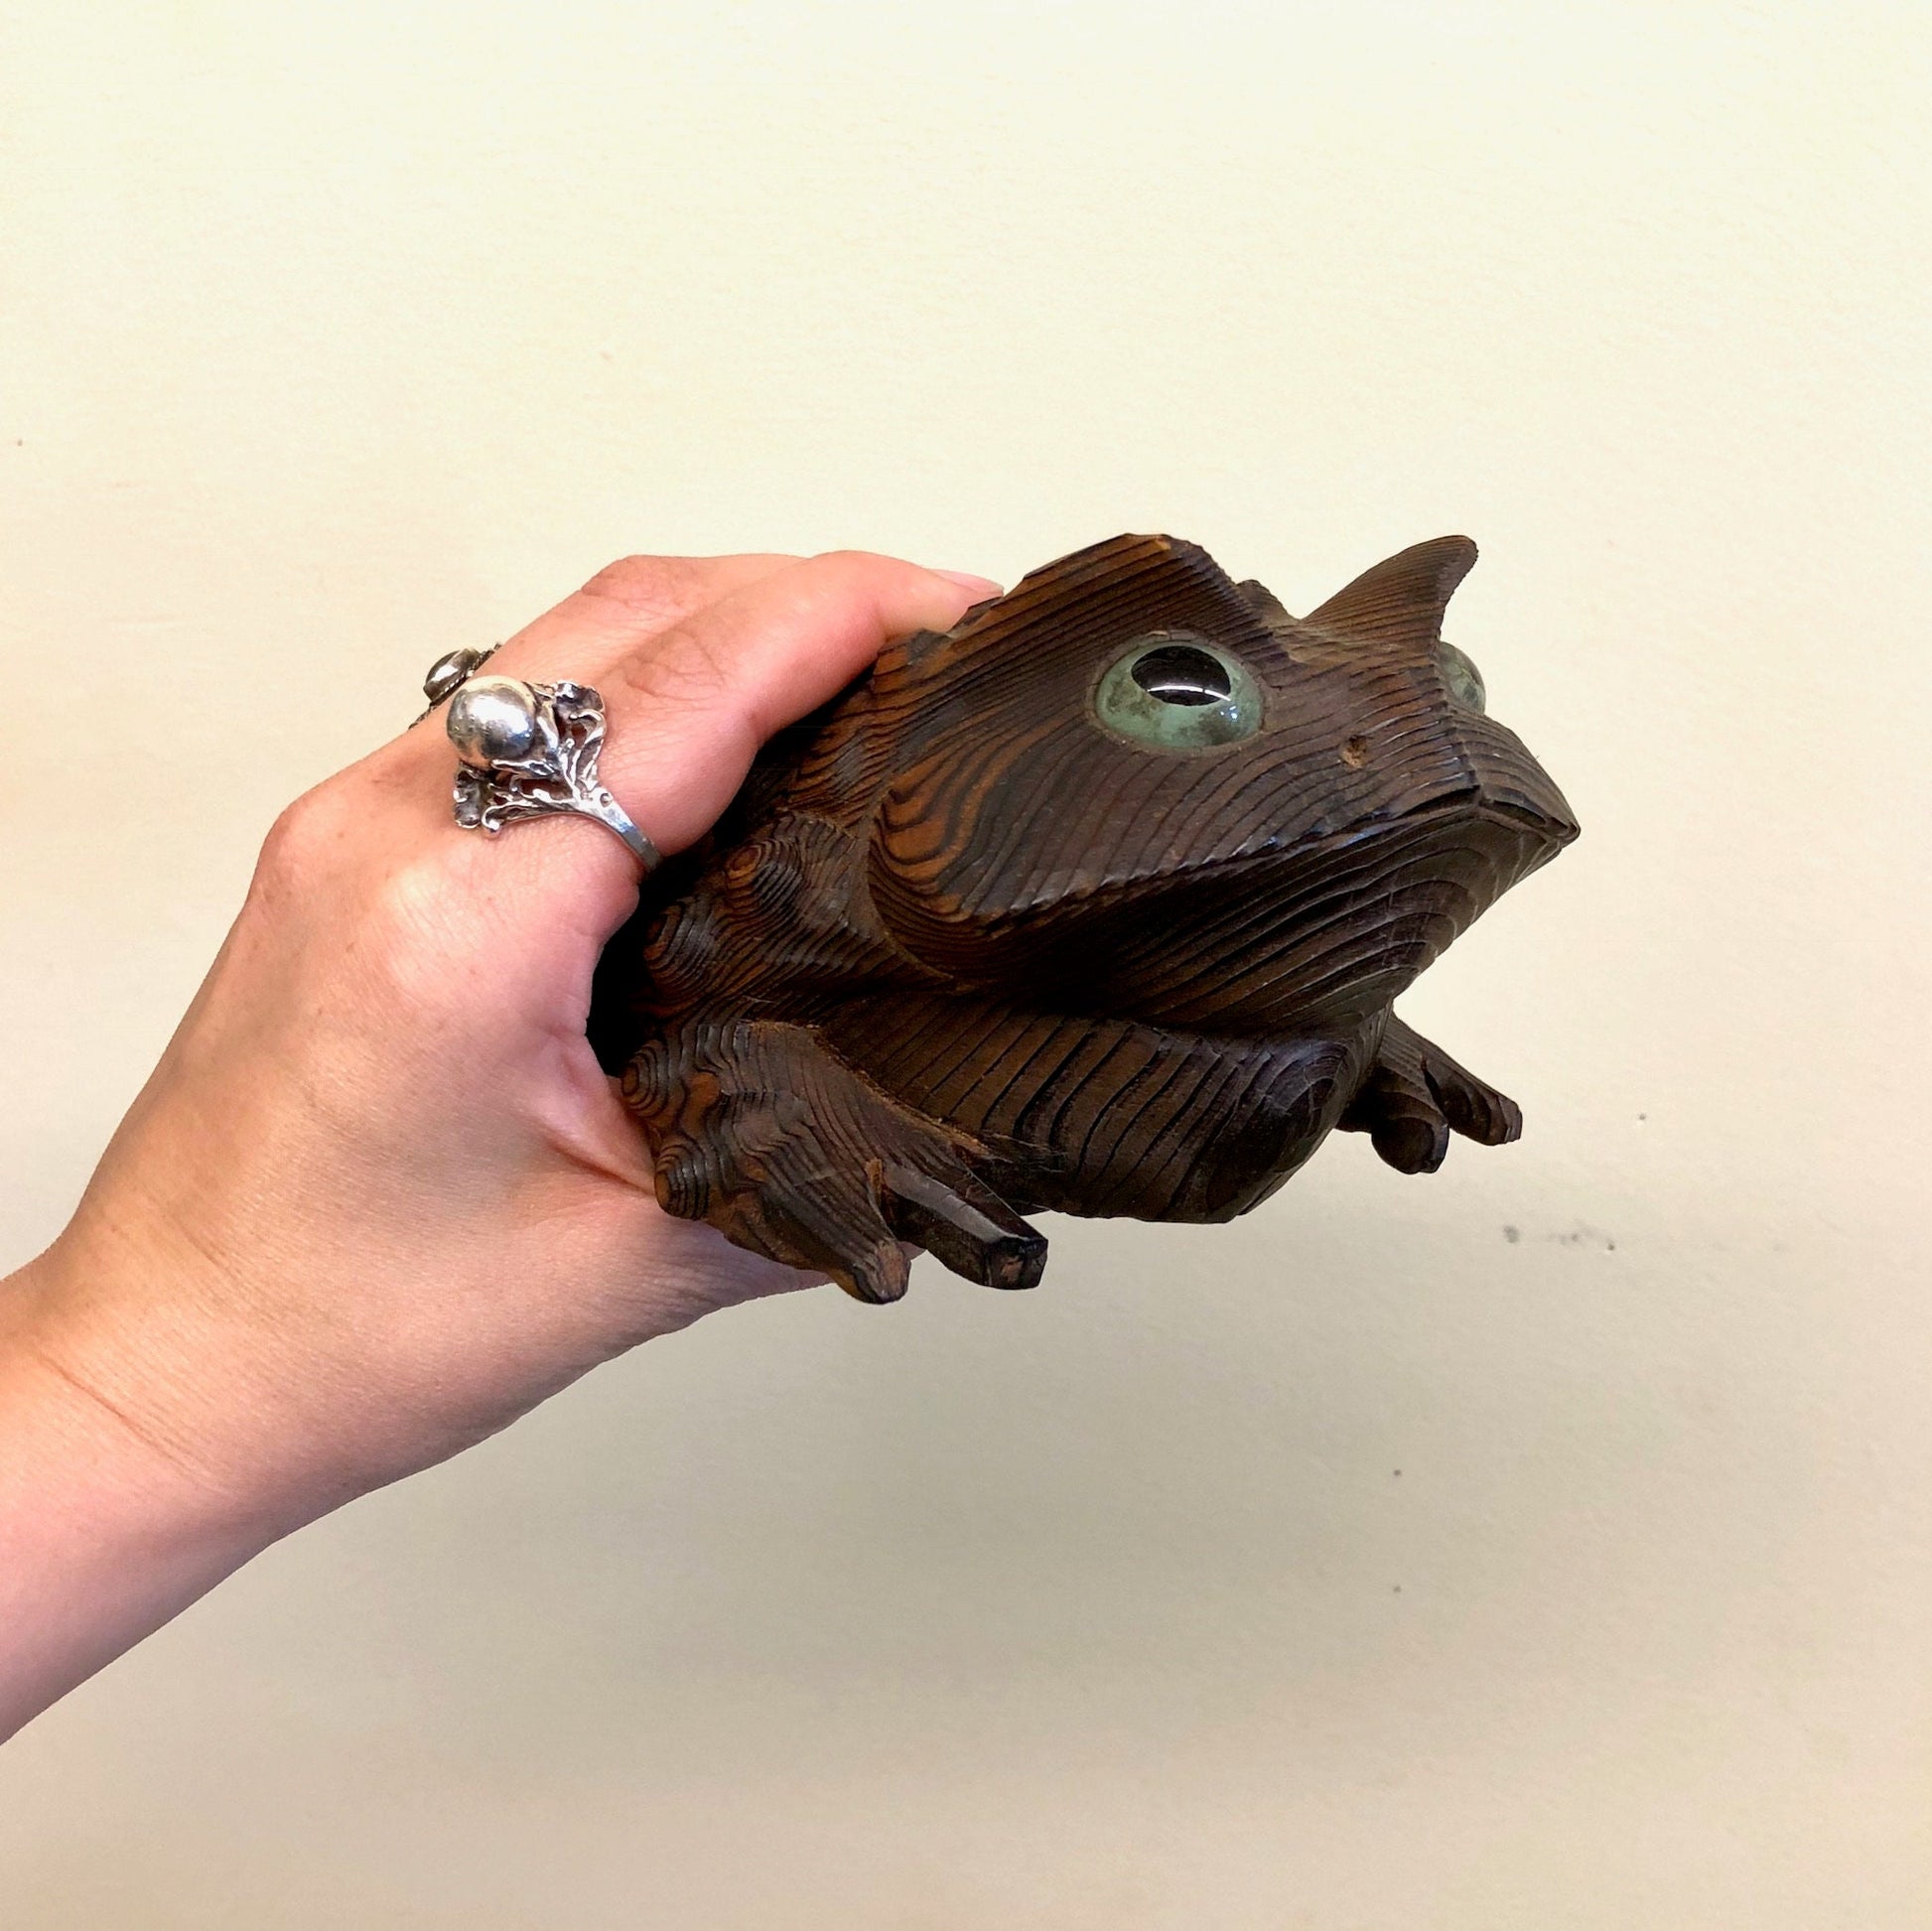 Hand holding a vintage carved wooden frog figurine with brown, black and green tones, suitable for home decor or mantlepiece display.